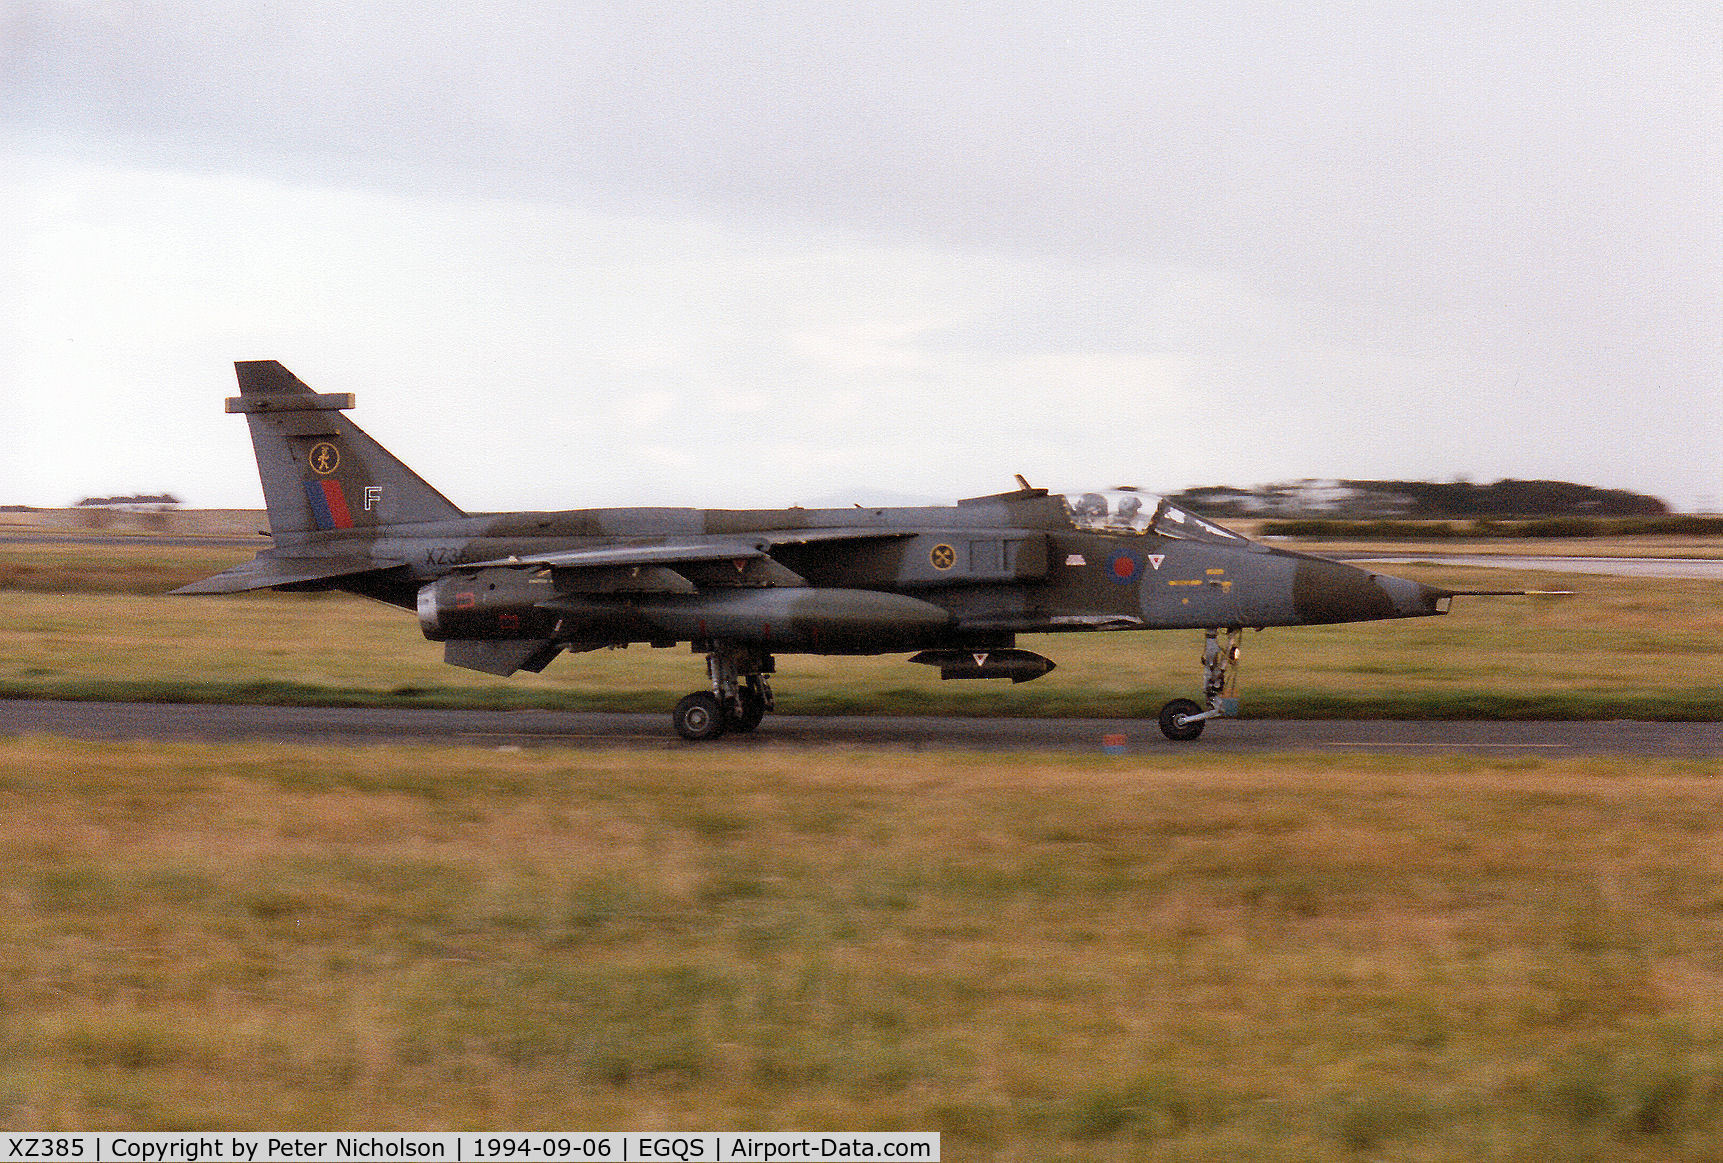 XZ385, 1977 Sepecat Jaguar GR.1A C/N S.150, Jaguar GR.1A, callsign Wildcat 1, of 16[Reserve] Squadron taxying to Runway 05 at RAF Lossiemouth in September 1994.